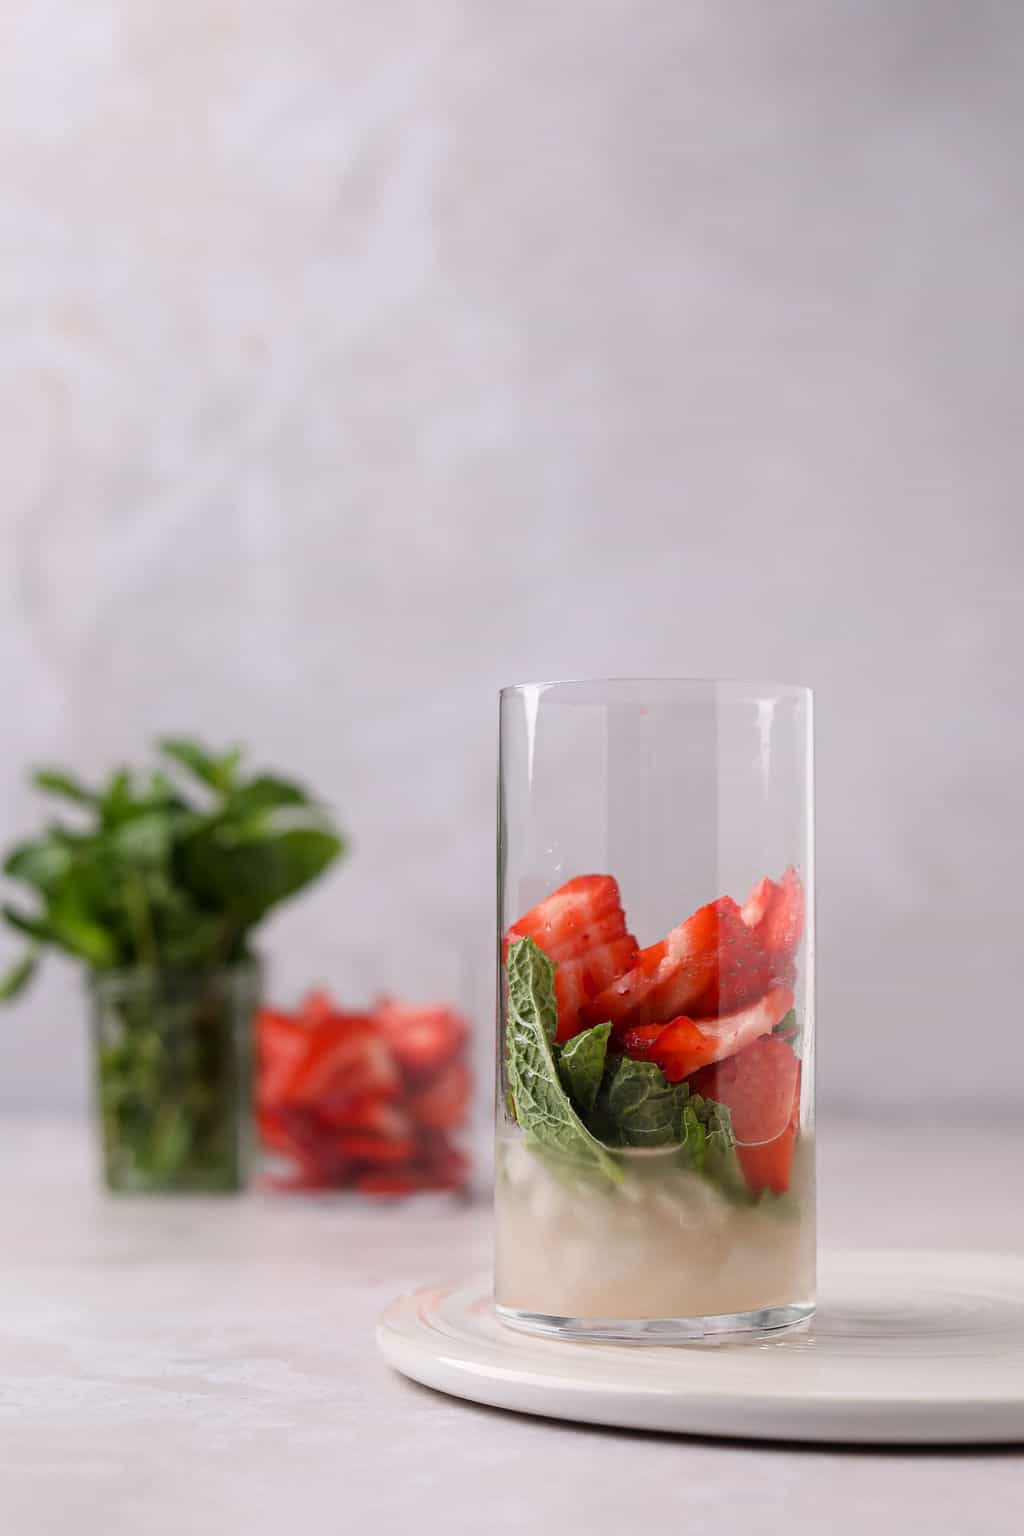 Strawberries, mint and lime juice in a glass.